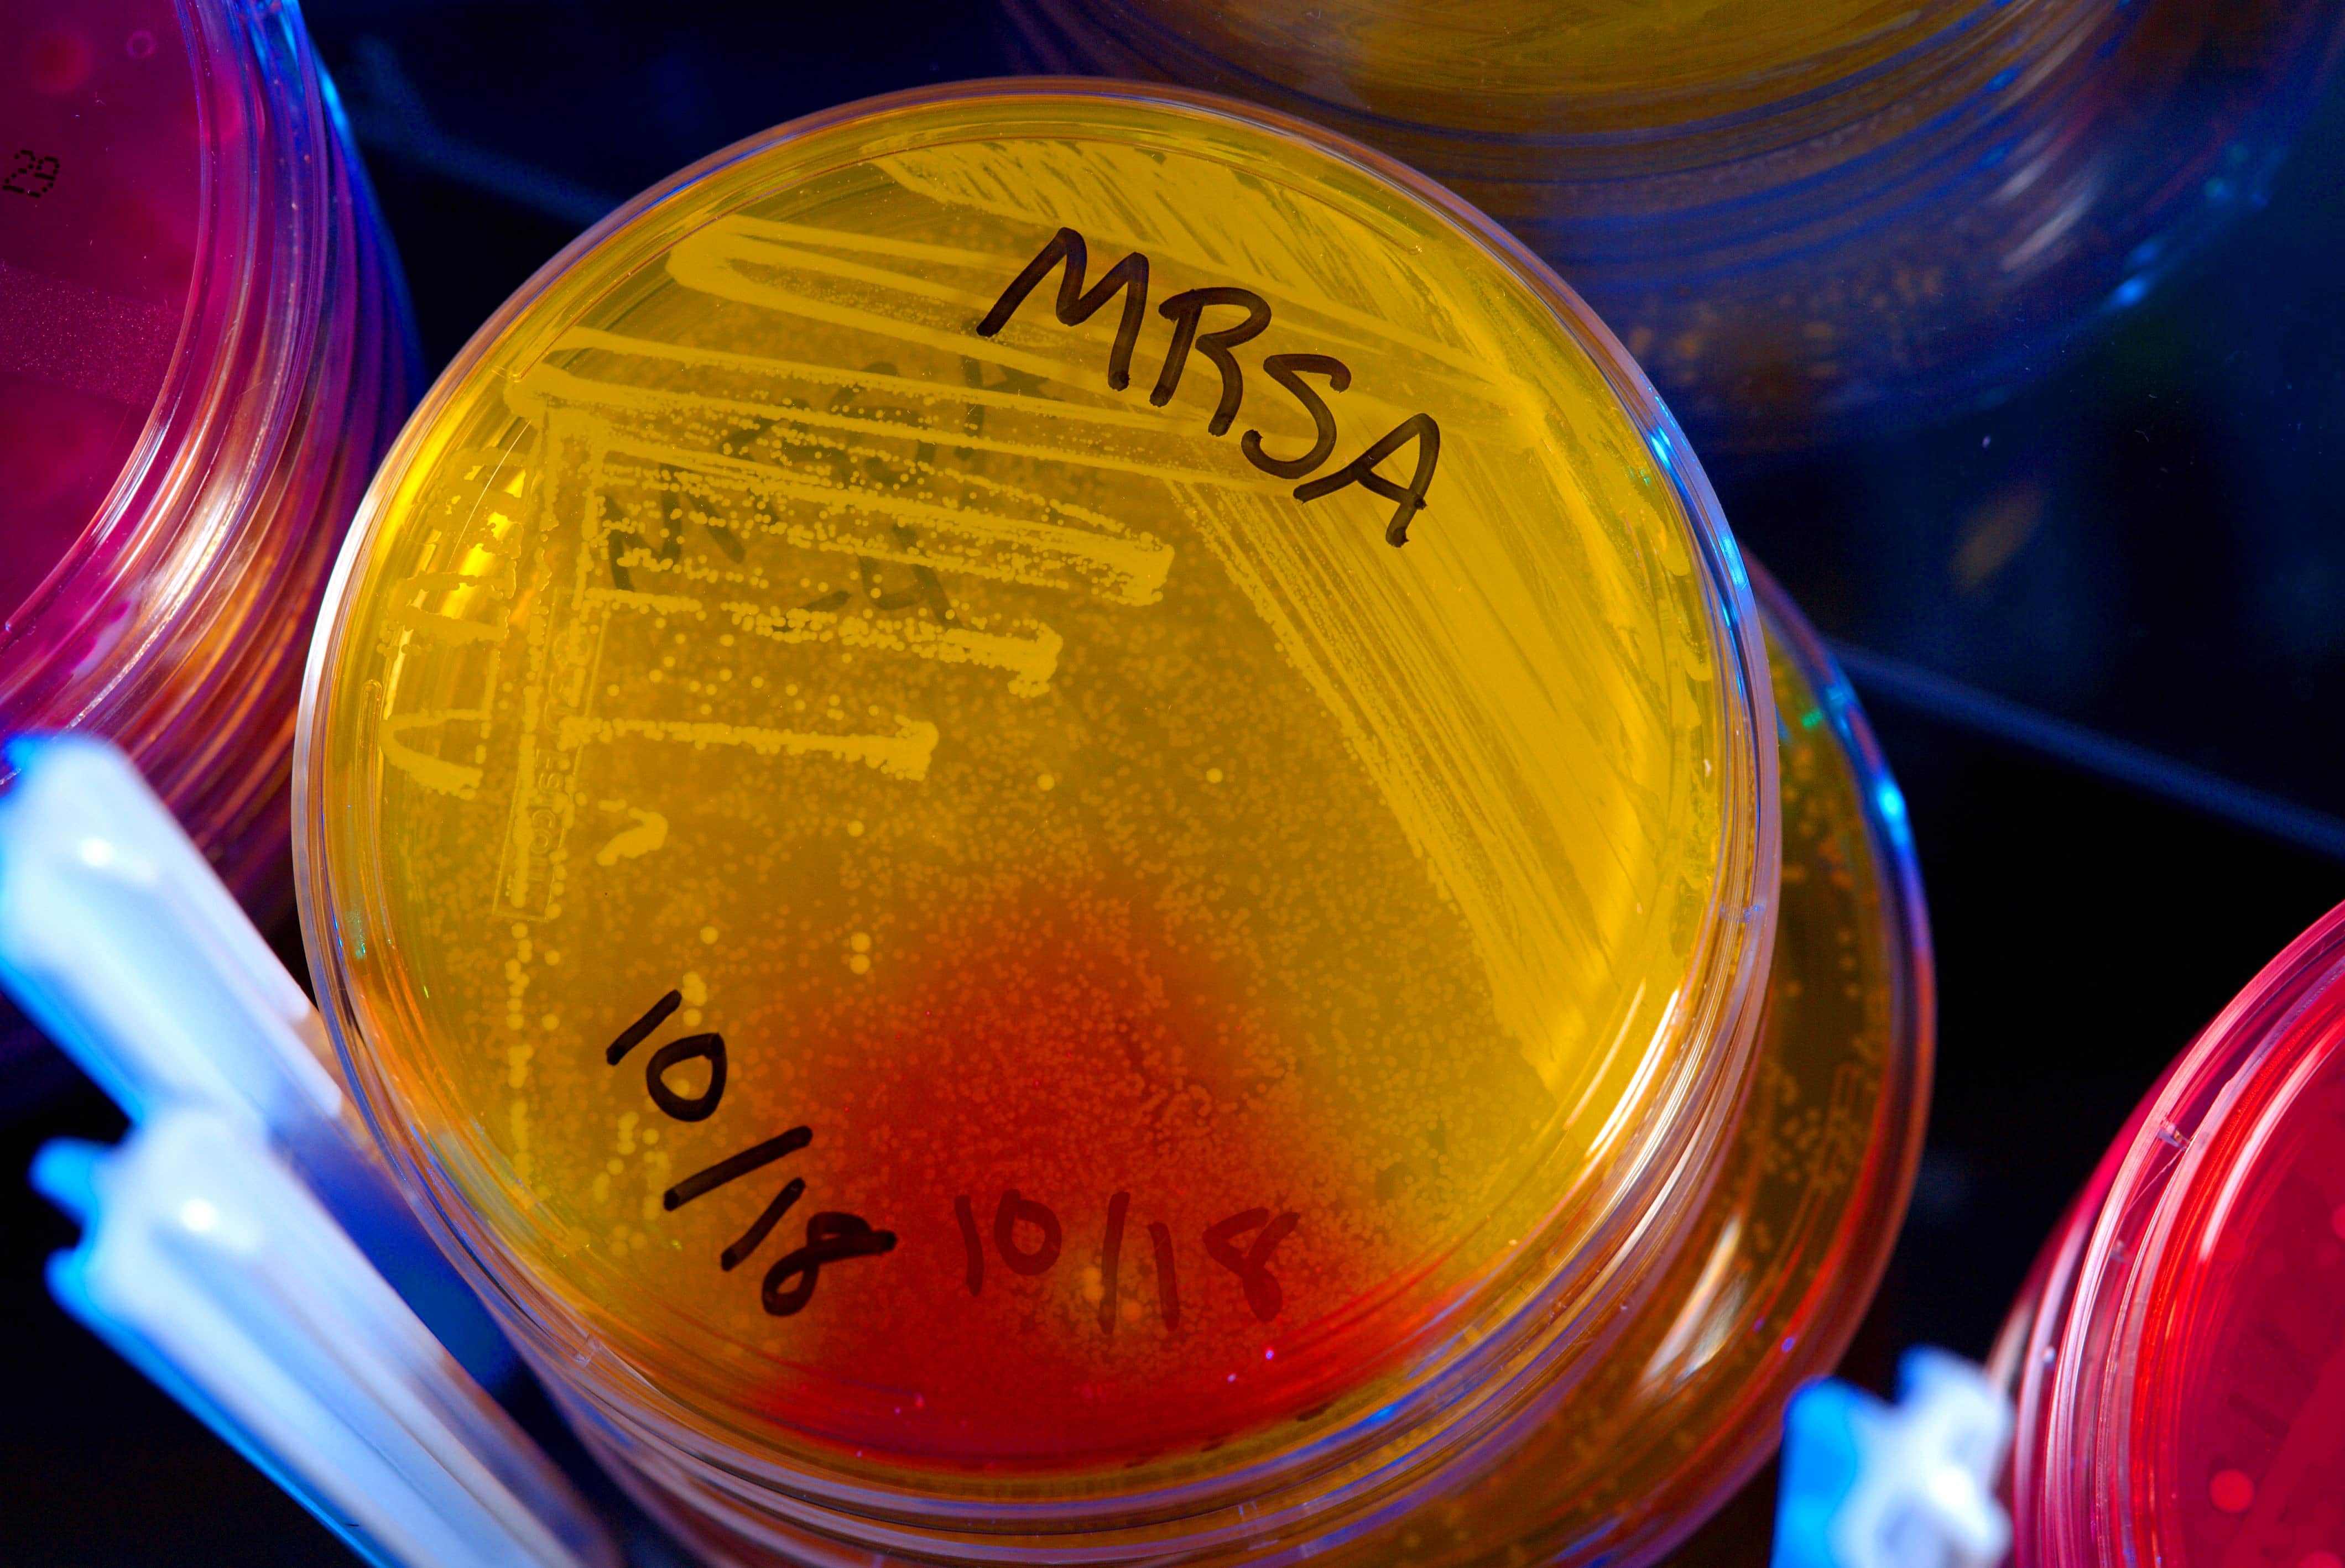 This undated photo provided by the Center for Disease Control (CDC) shows plates of Methicillin-Resistant Staphylococcus Aureus (MRSA)., AP Photo/Center for Disease Control